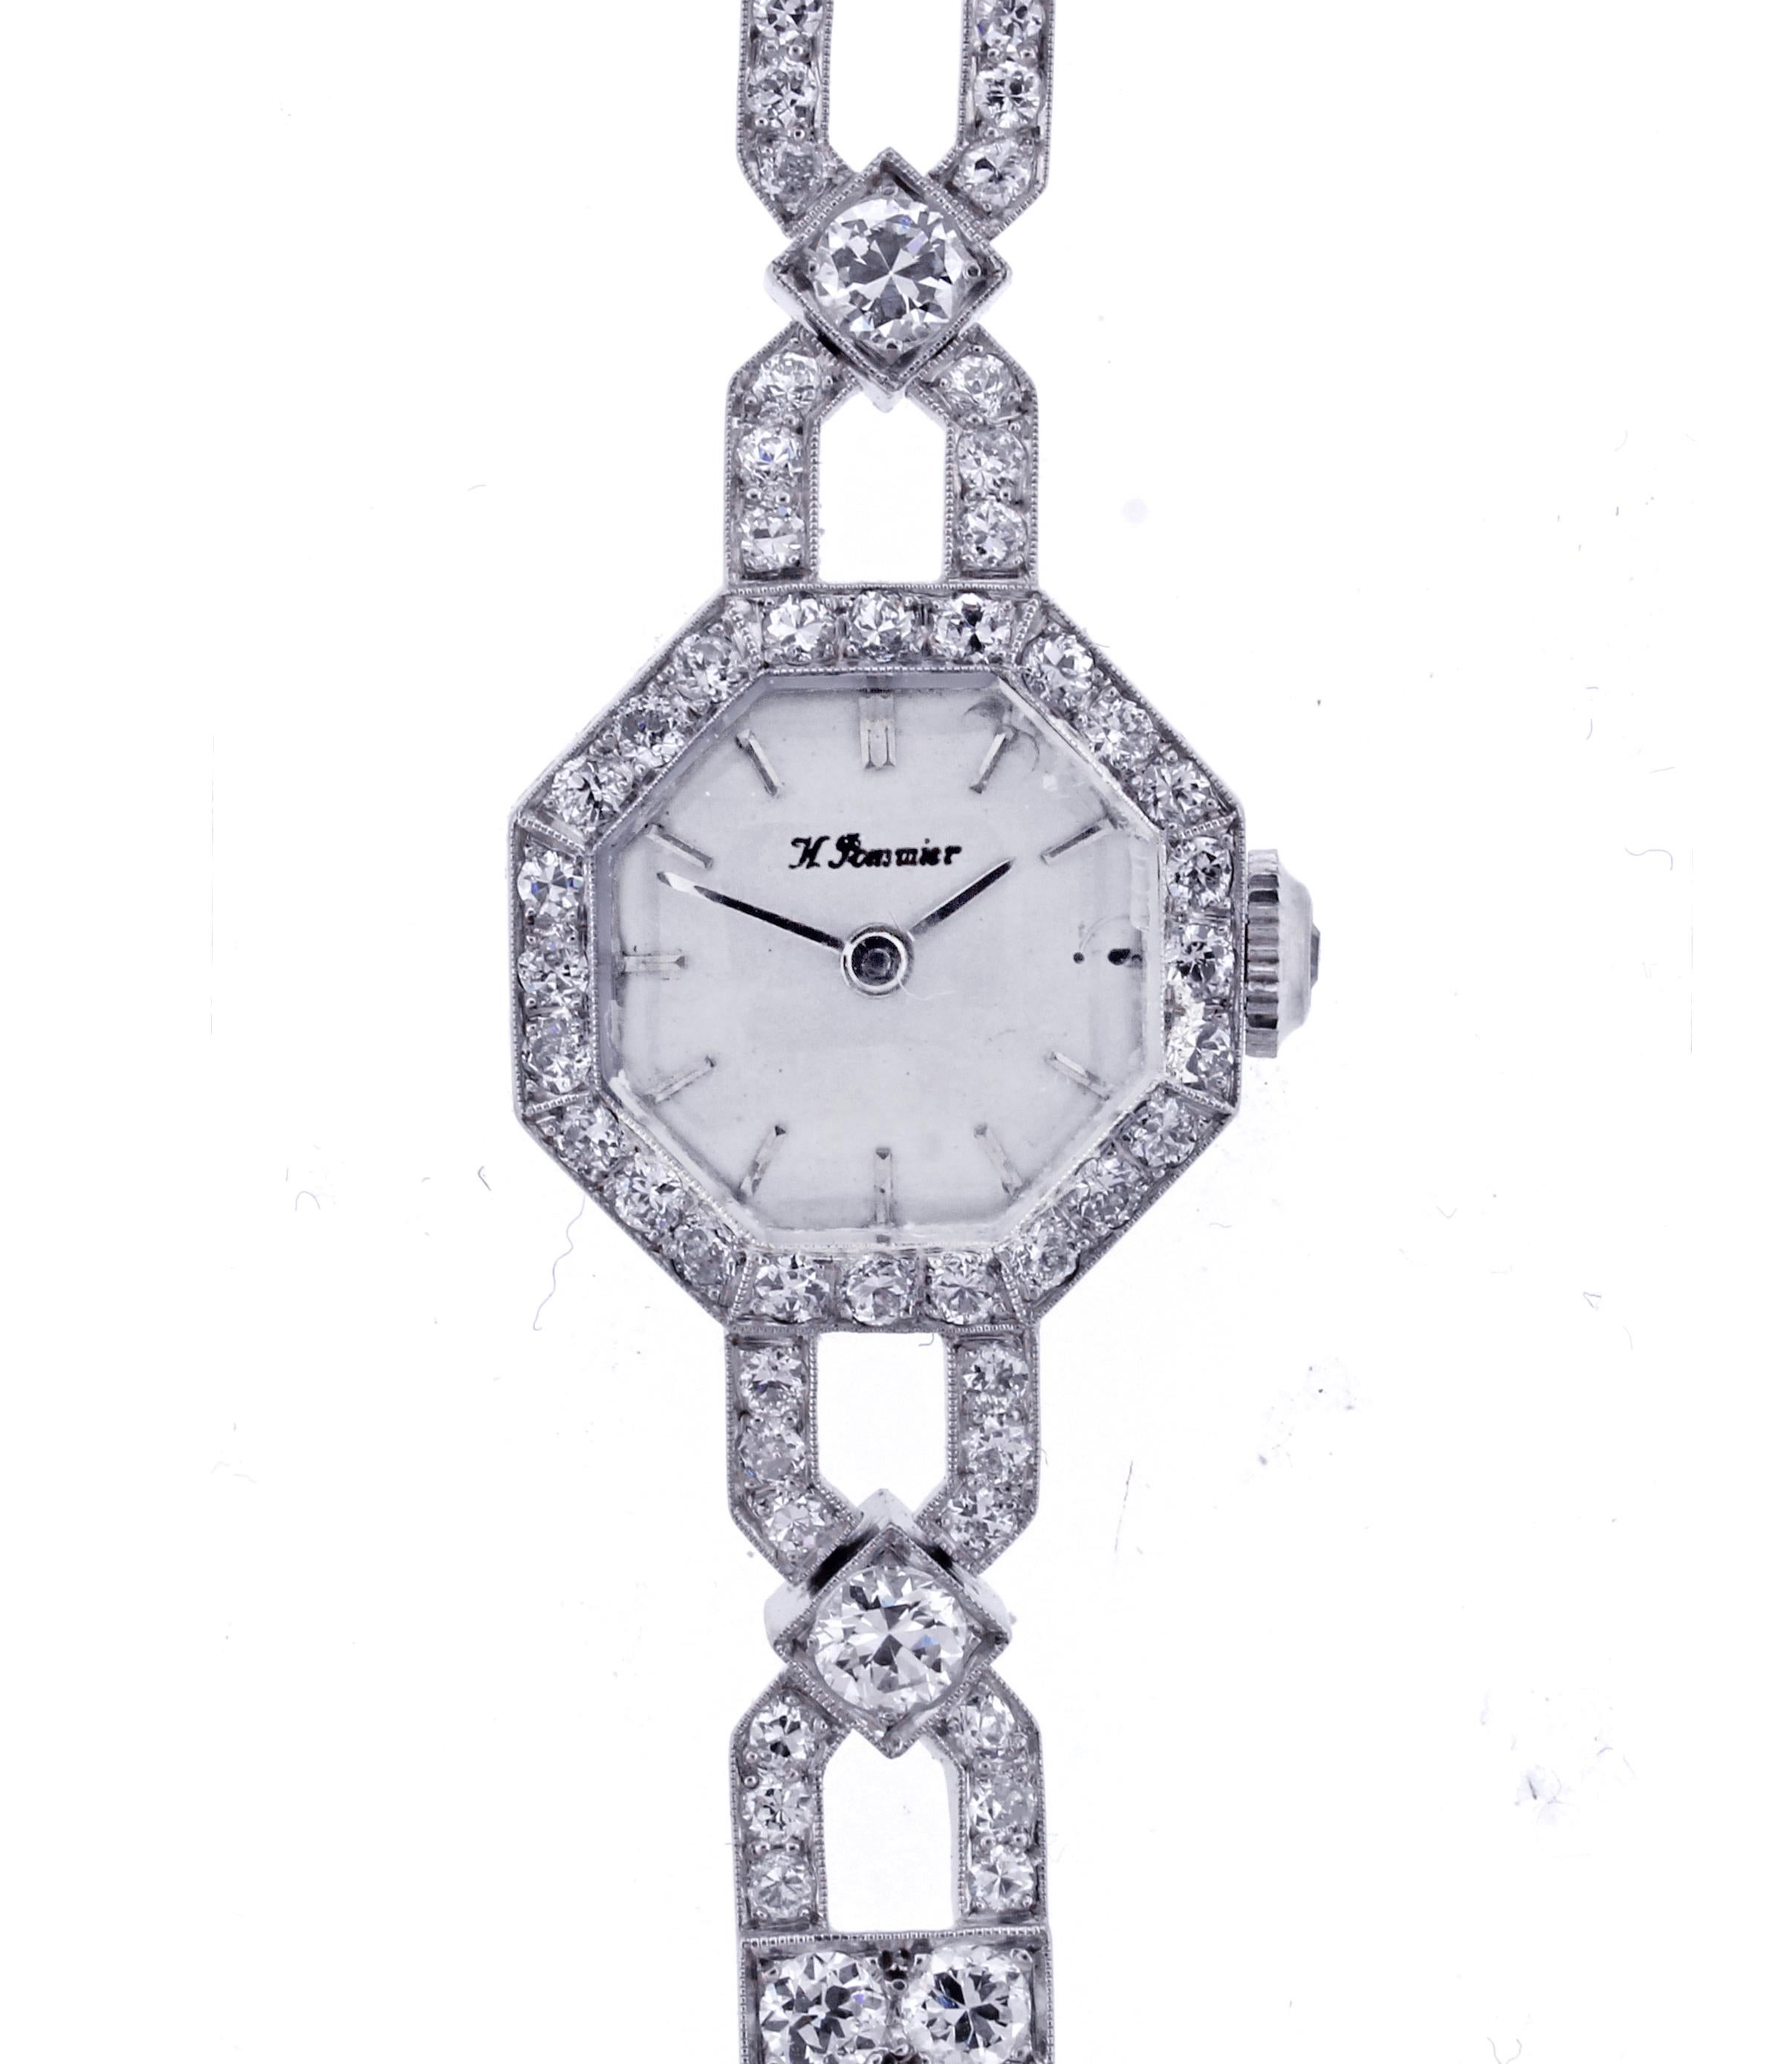  Art Deco lady's bracelet watch featuring a total of 4.35 carats of diamonds. The octagonal dial as well as the unusual link bracelet are completely set in Old European cut diamonds. Twenty-five larger diamonds at the intersection of each link have